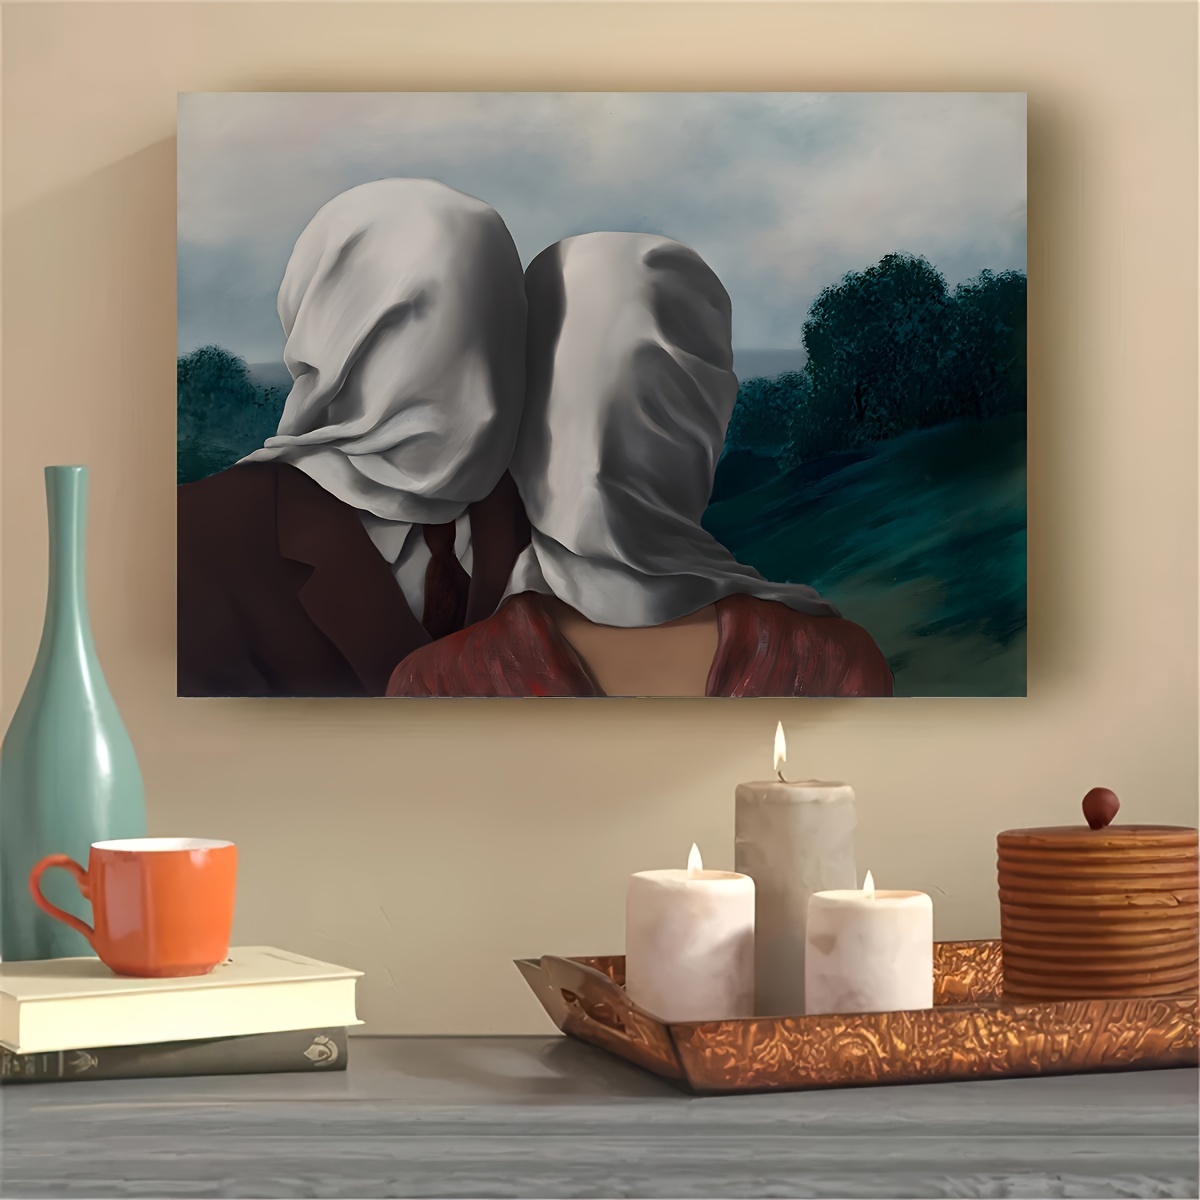 1pc unframed canvas poster retro art rene magritte the lowers reproduction canvas poster ideal gift for bedroom living room corridor wall art wall decor winter decor room decoration